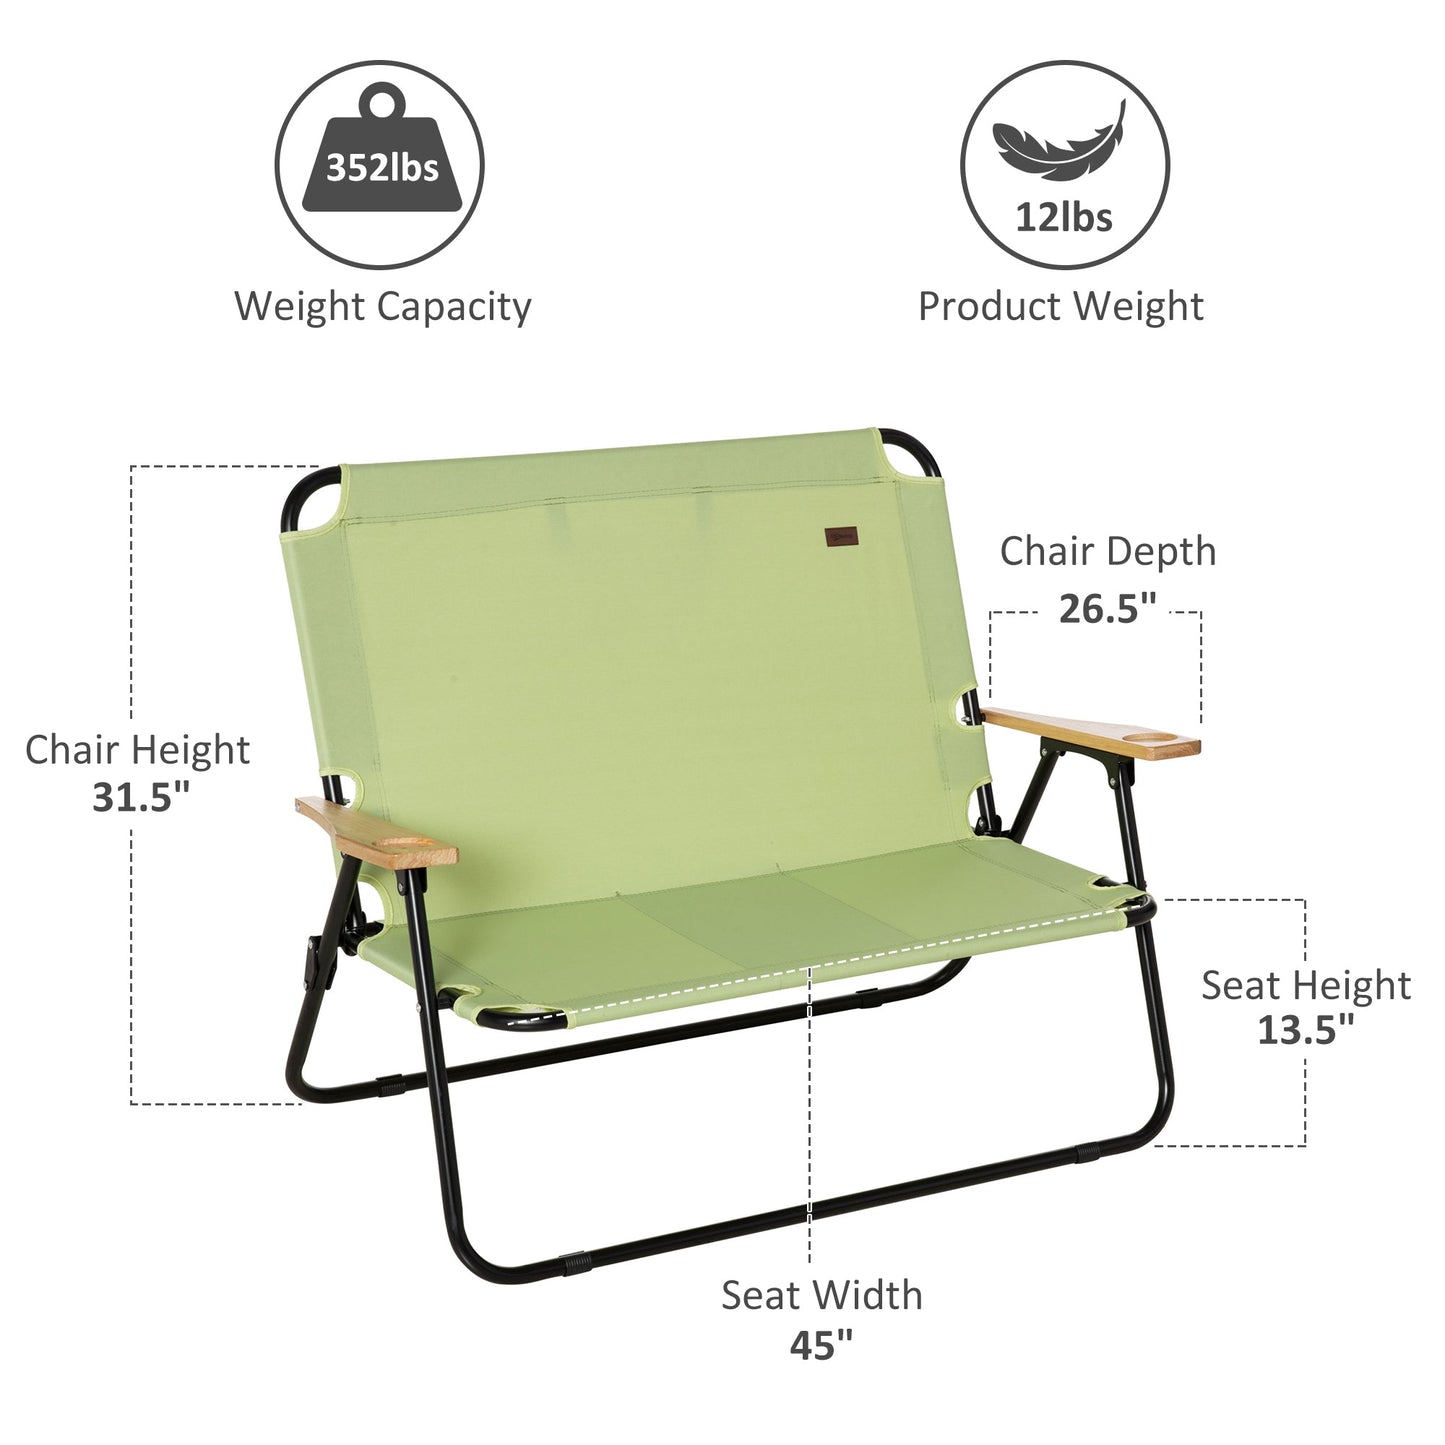 Outdoor and Garden-Portable Folding Double Camping Chair Cup Holder, Loveseat for 2 Person, Outdoor Chair with Wood Armrest Beach Travel, Green - Outdoor Style Company